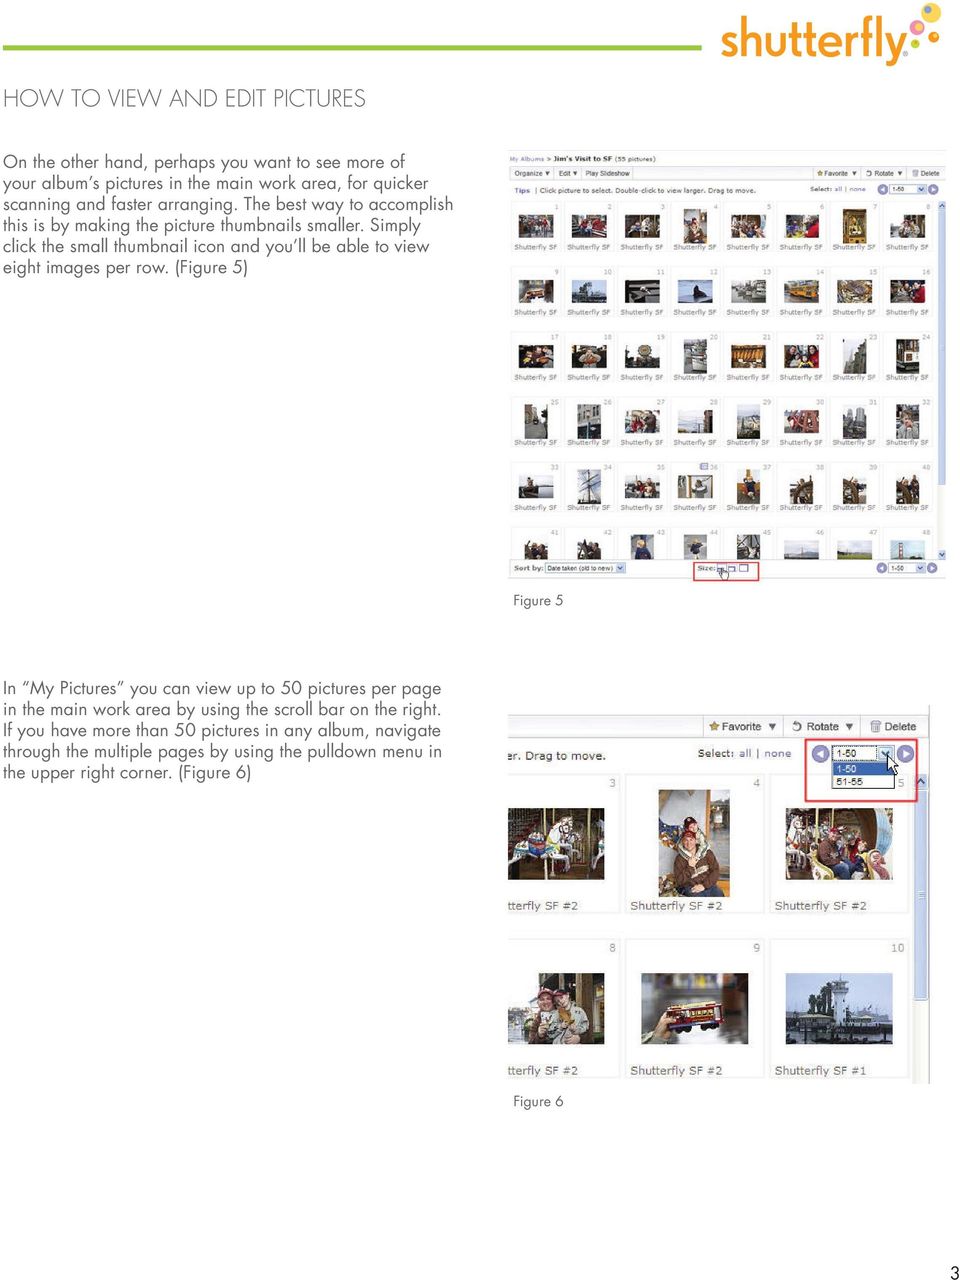 Simply click the small thumbnail icon and you ll be able to view eight images per row.